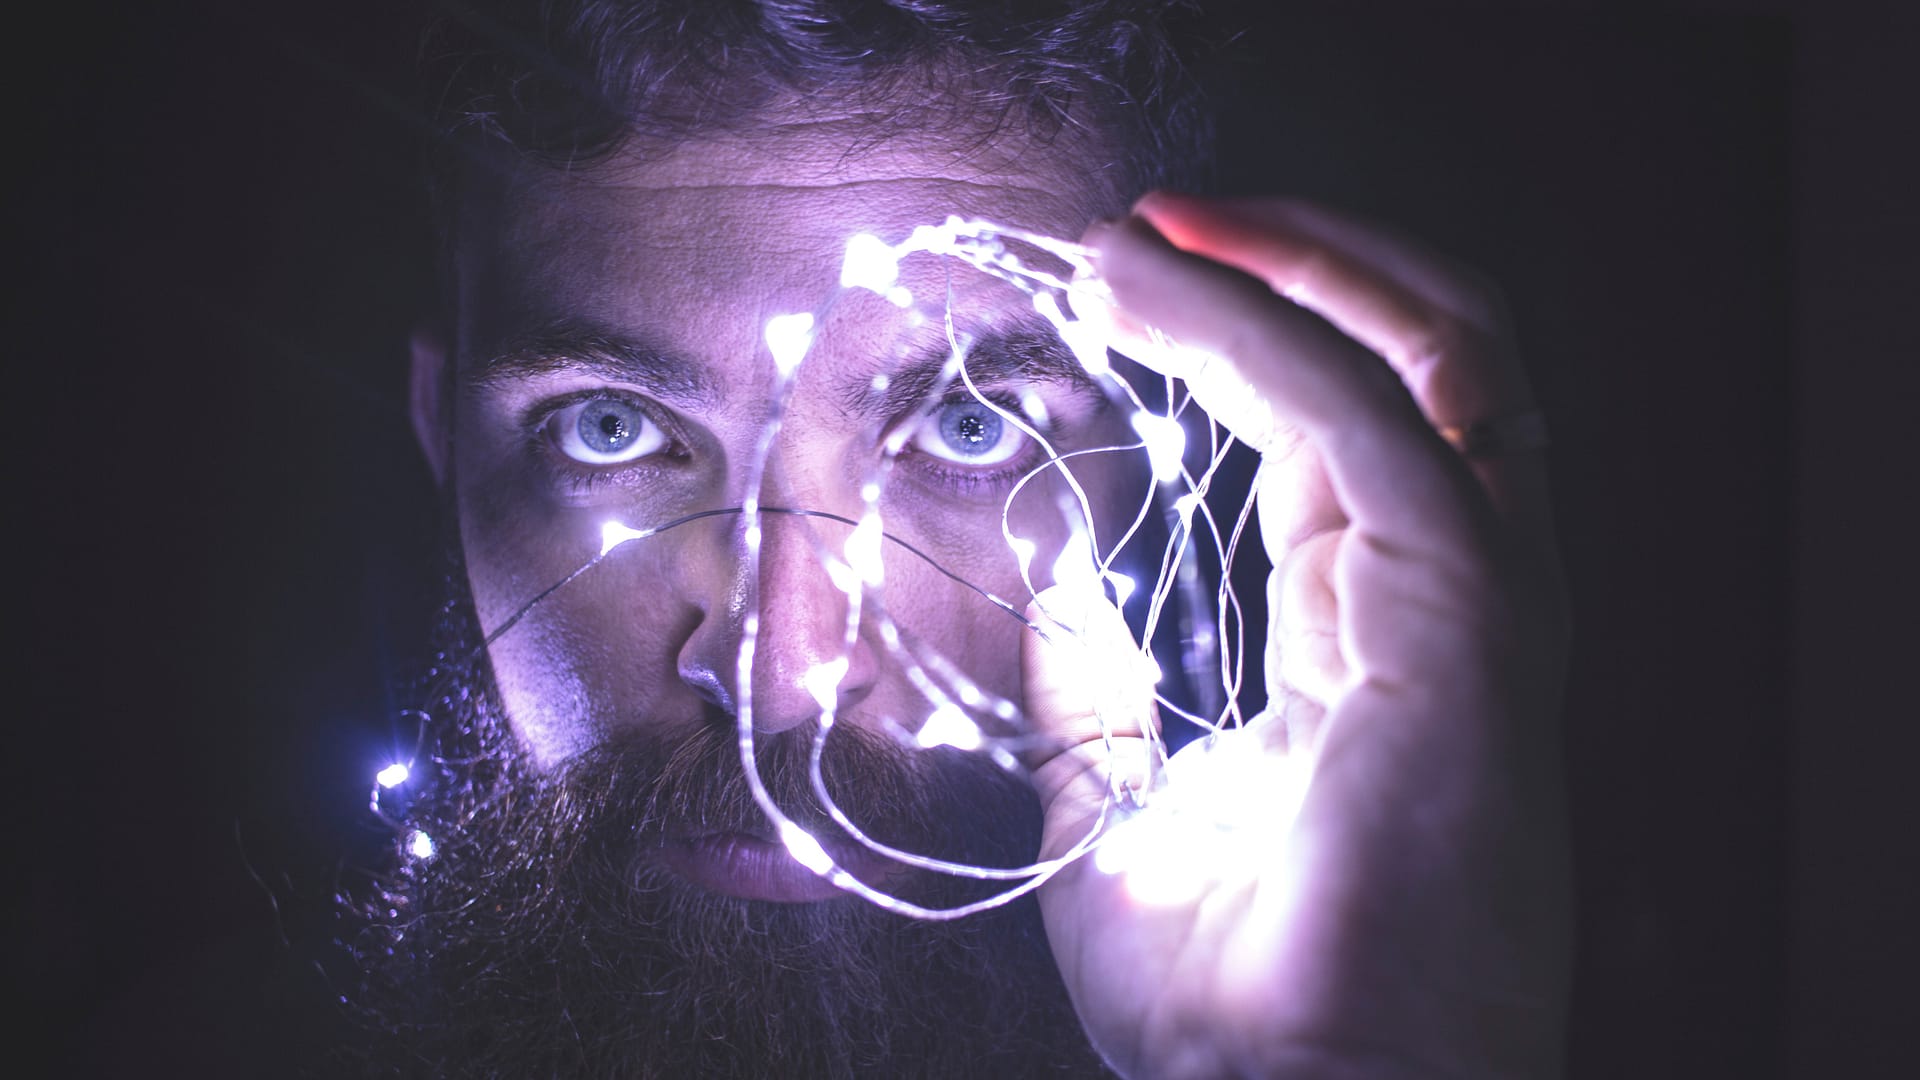 Bearded man holding up a string of led lights near his eyes